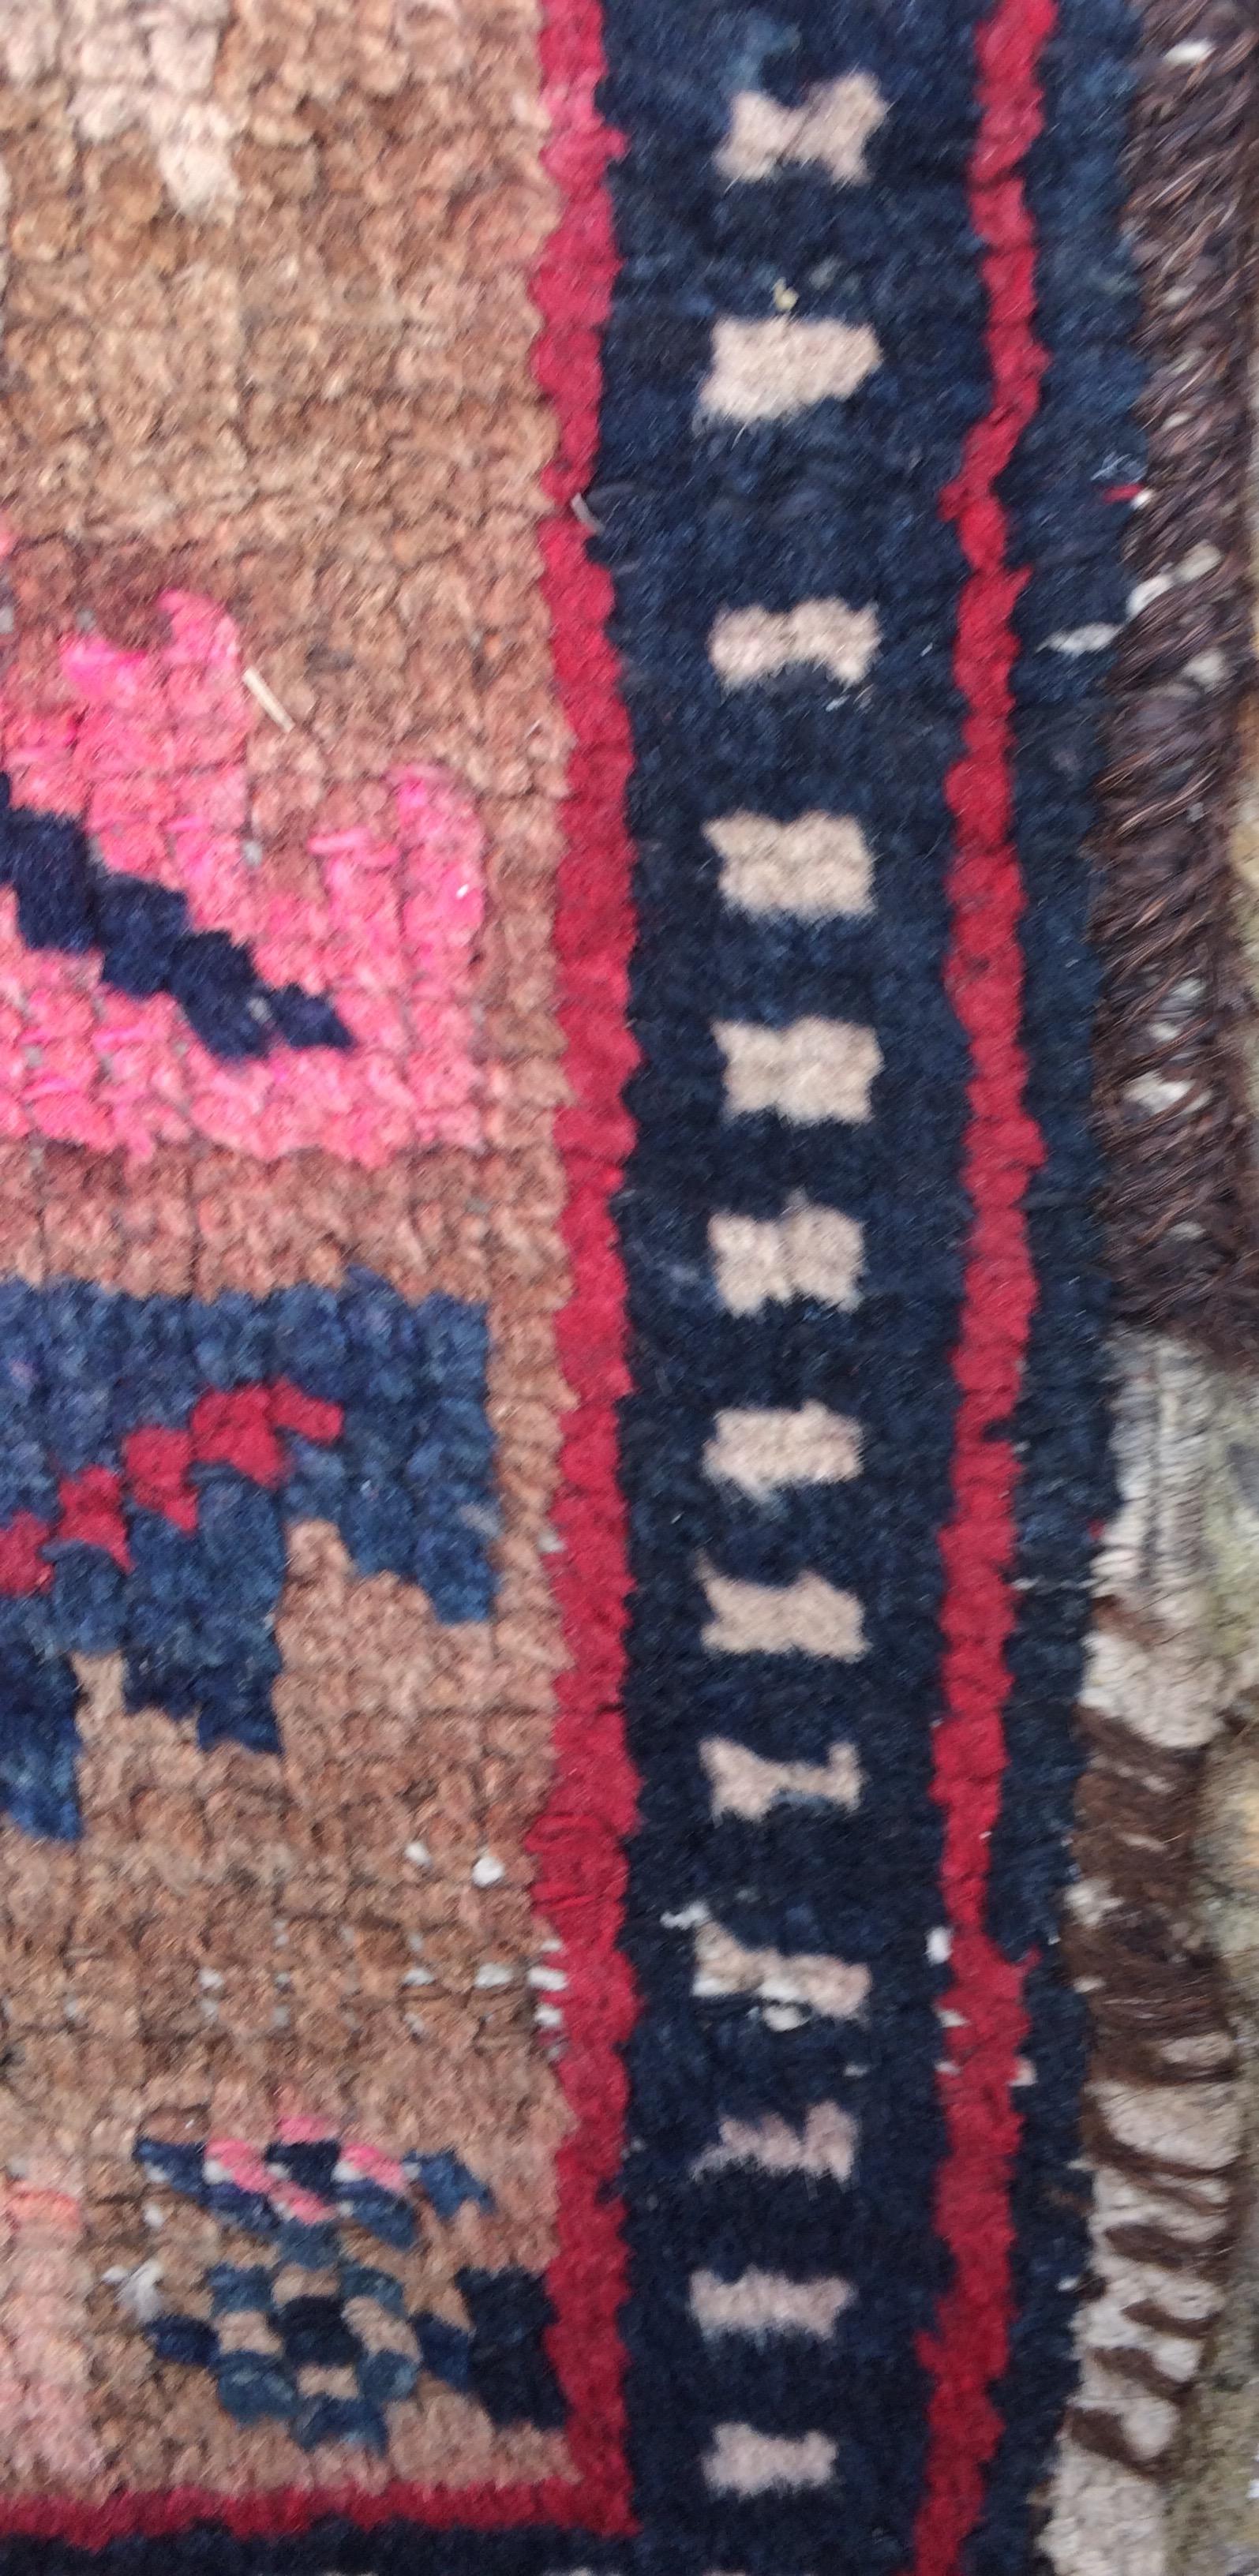 Decorative area rug with very vivid colors that is in semi distressed condition consistent with age.

Minor imperfections consistent with age and use (see detailed photos).

Rendered in variegated shades of red, blue, beige, pale pink. Perfect